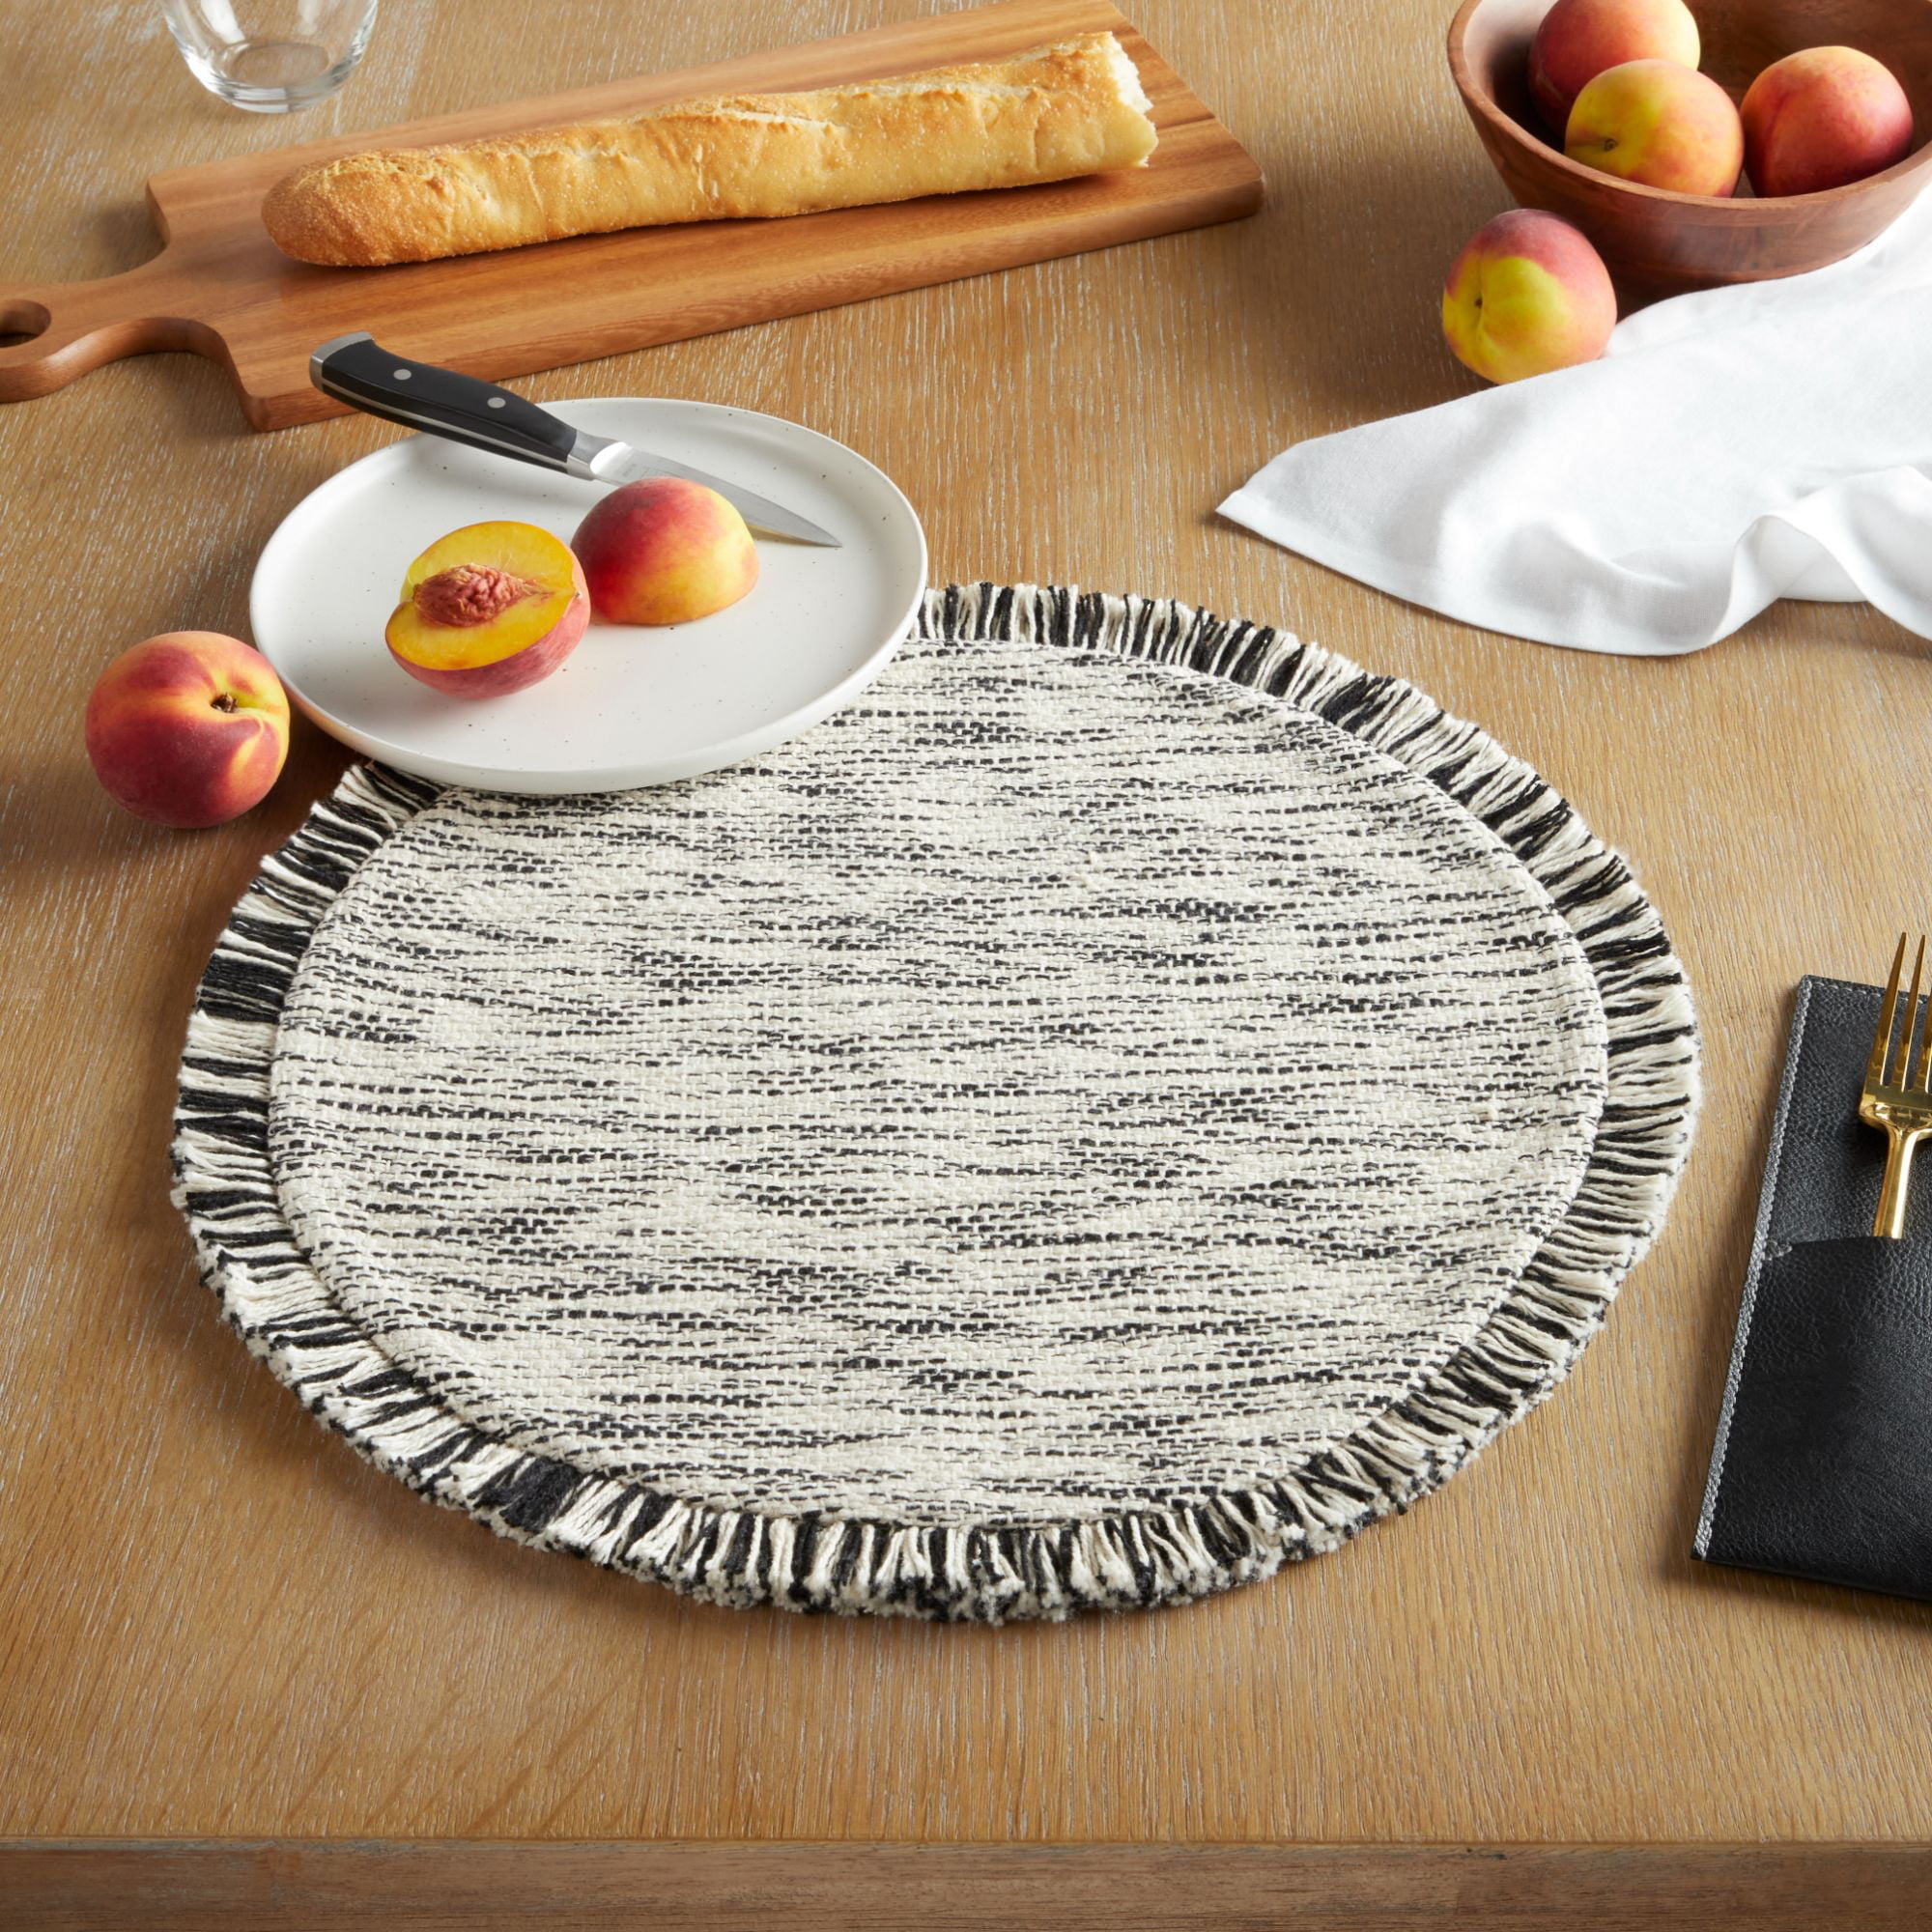 the placemat which is a cream and black heathered pattern